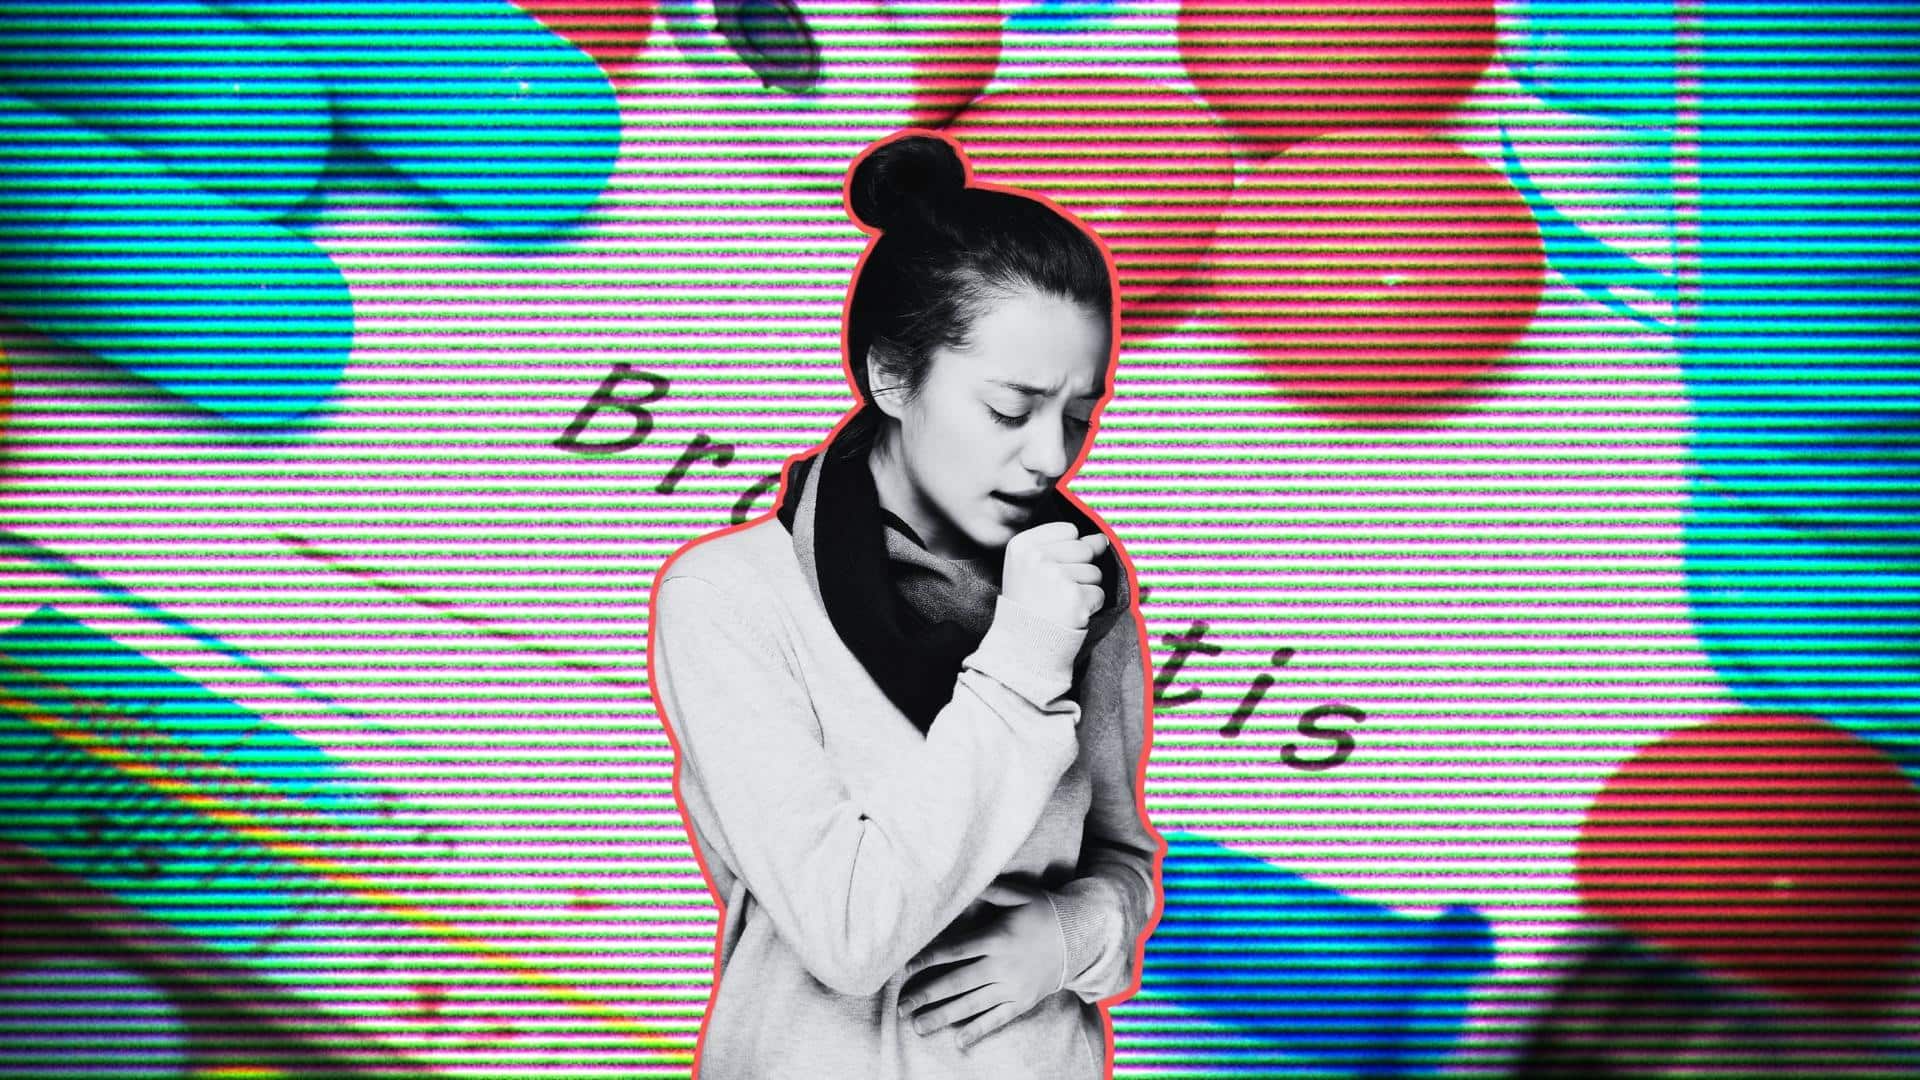 From causes to treatment, here's everything to know about Bronchitis